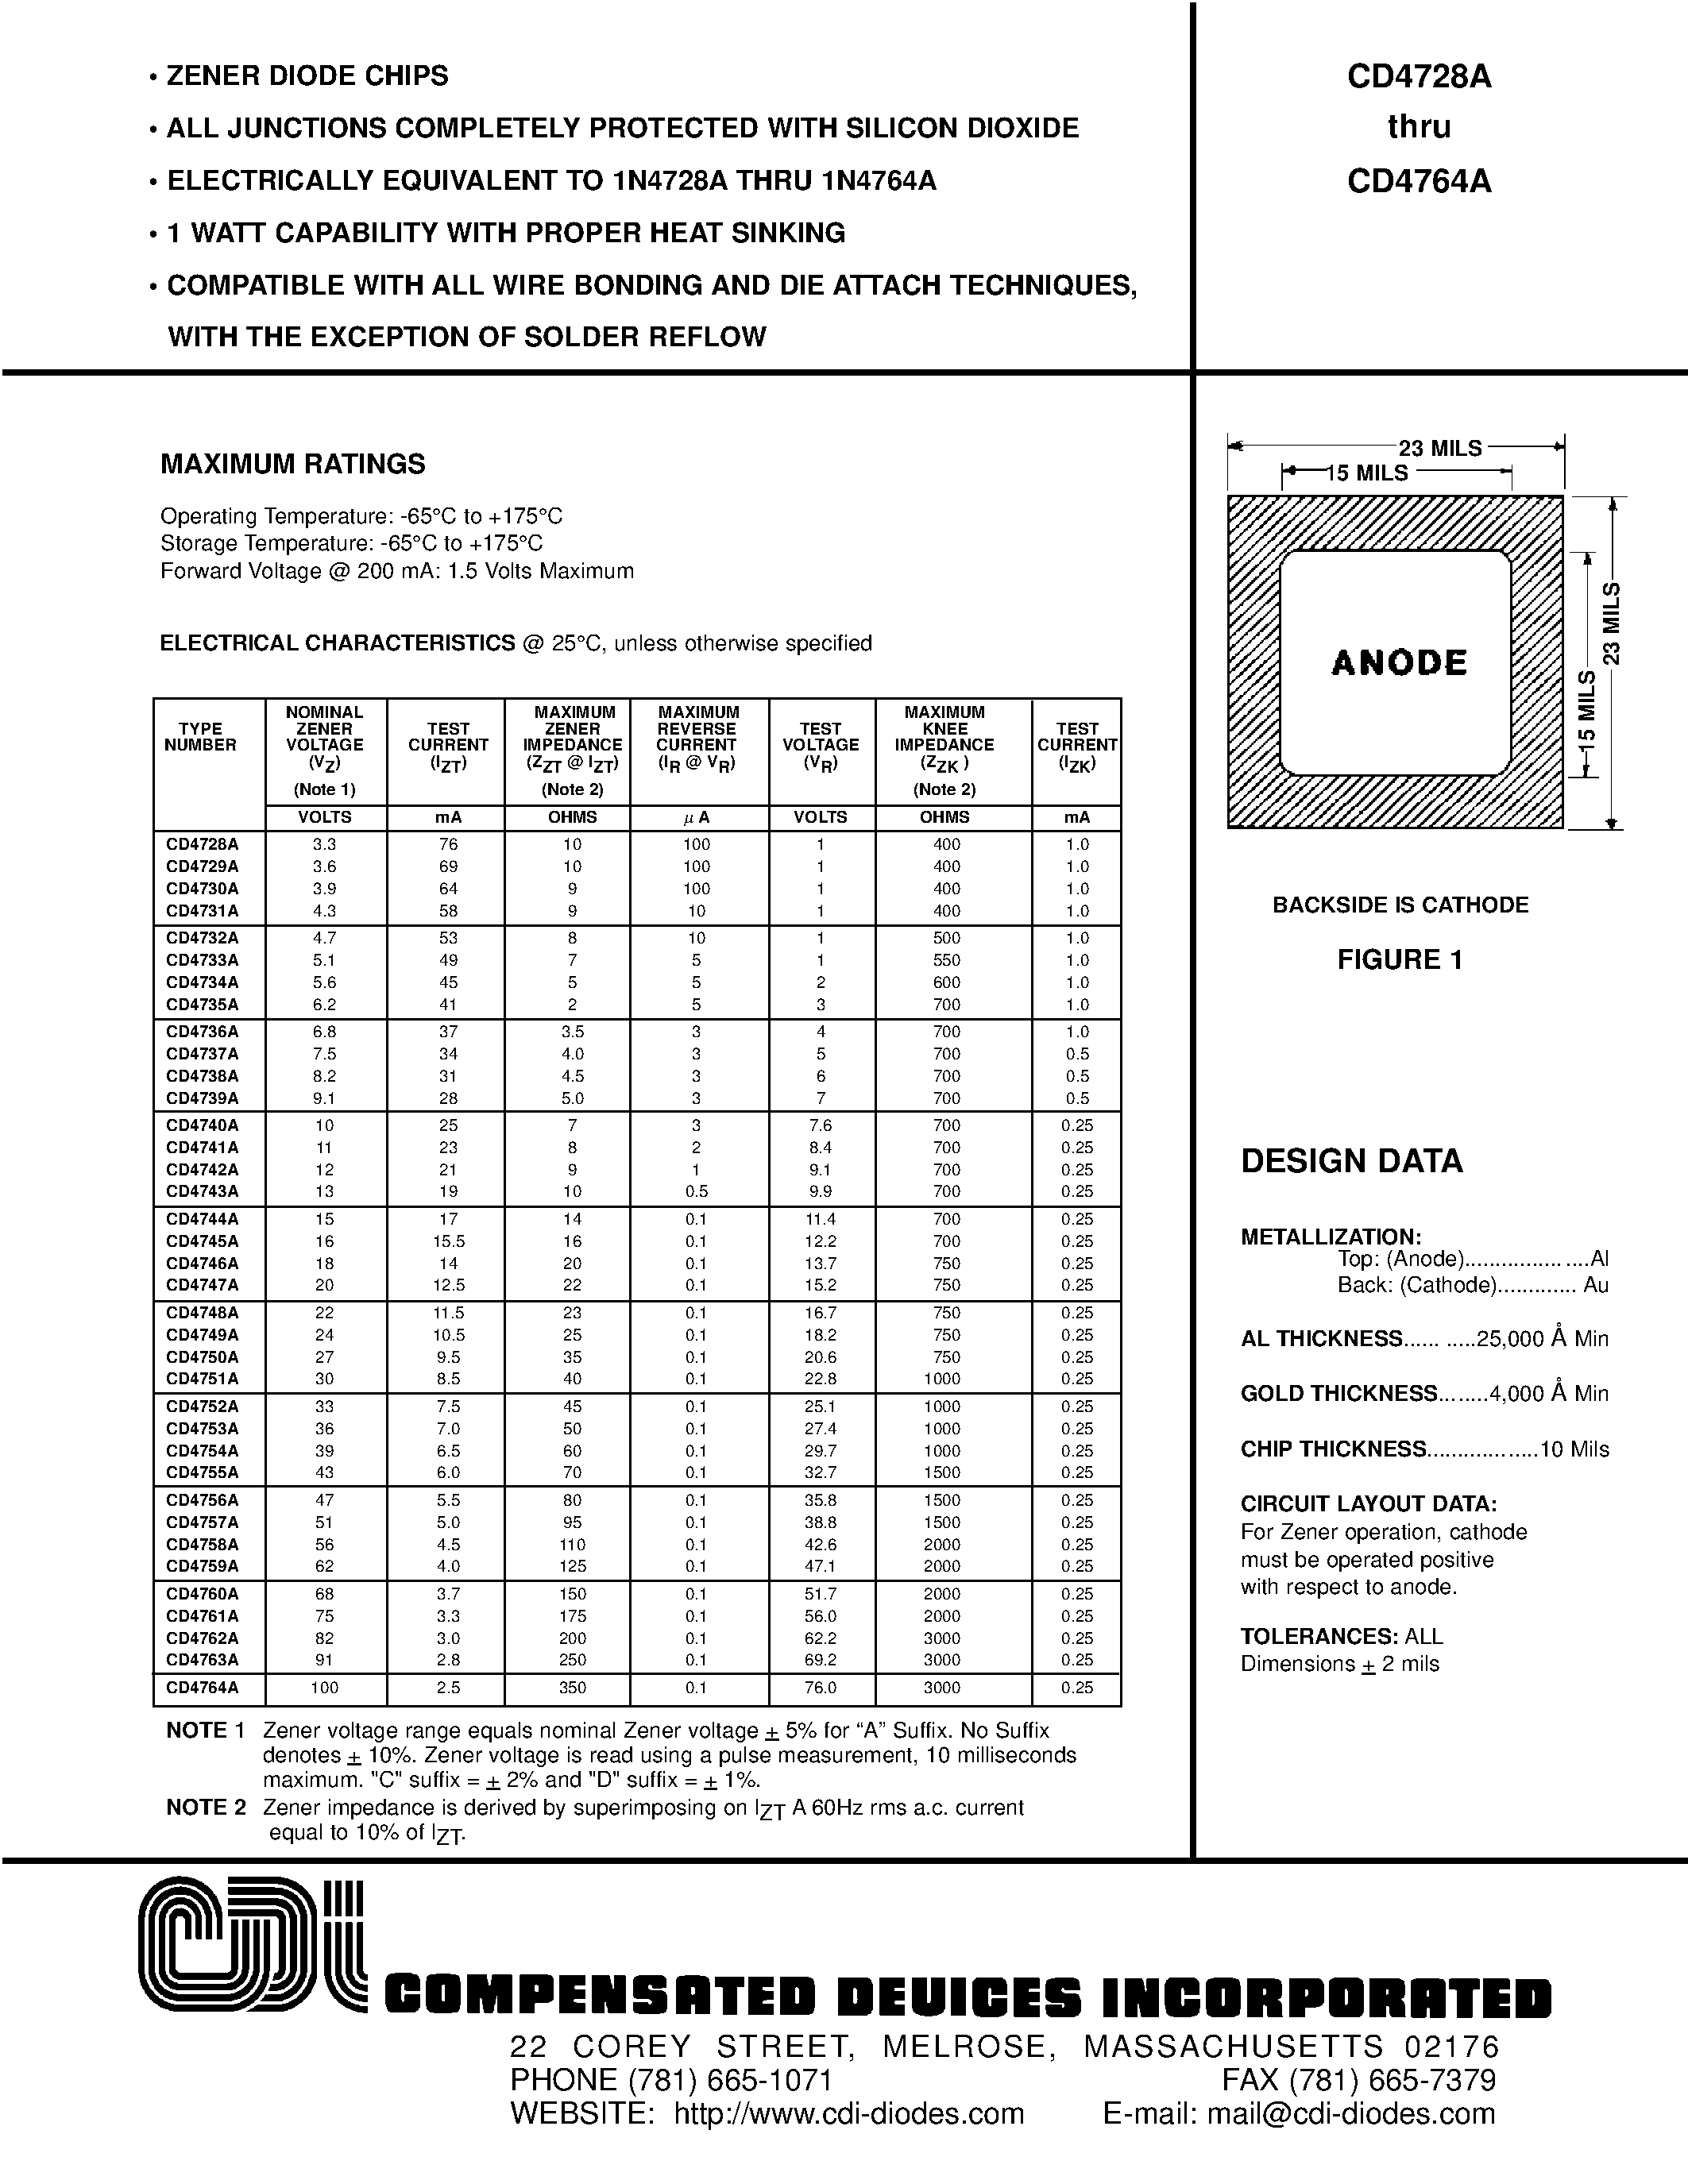 Datasheet CD4753A - ZENER DIODE CHIPS page 1